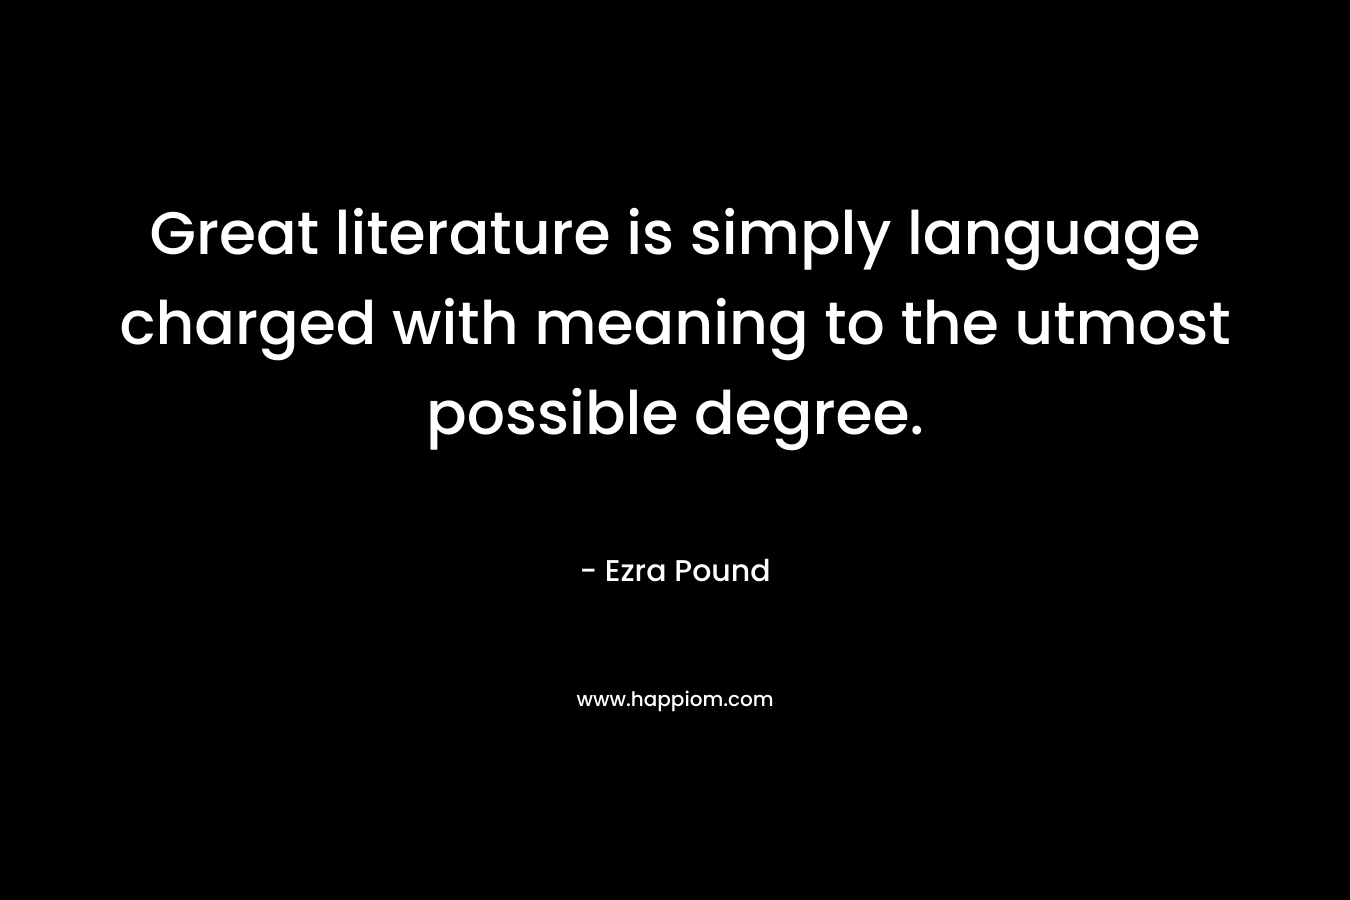 Great literature is simply language charged with meaning to the utmost possible degree.